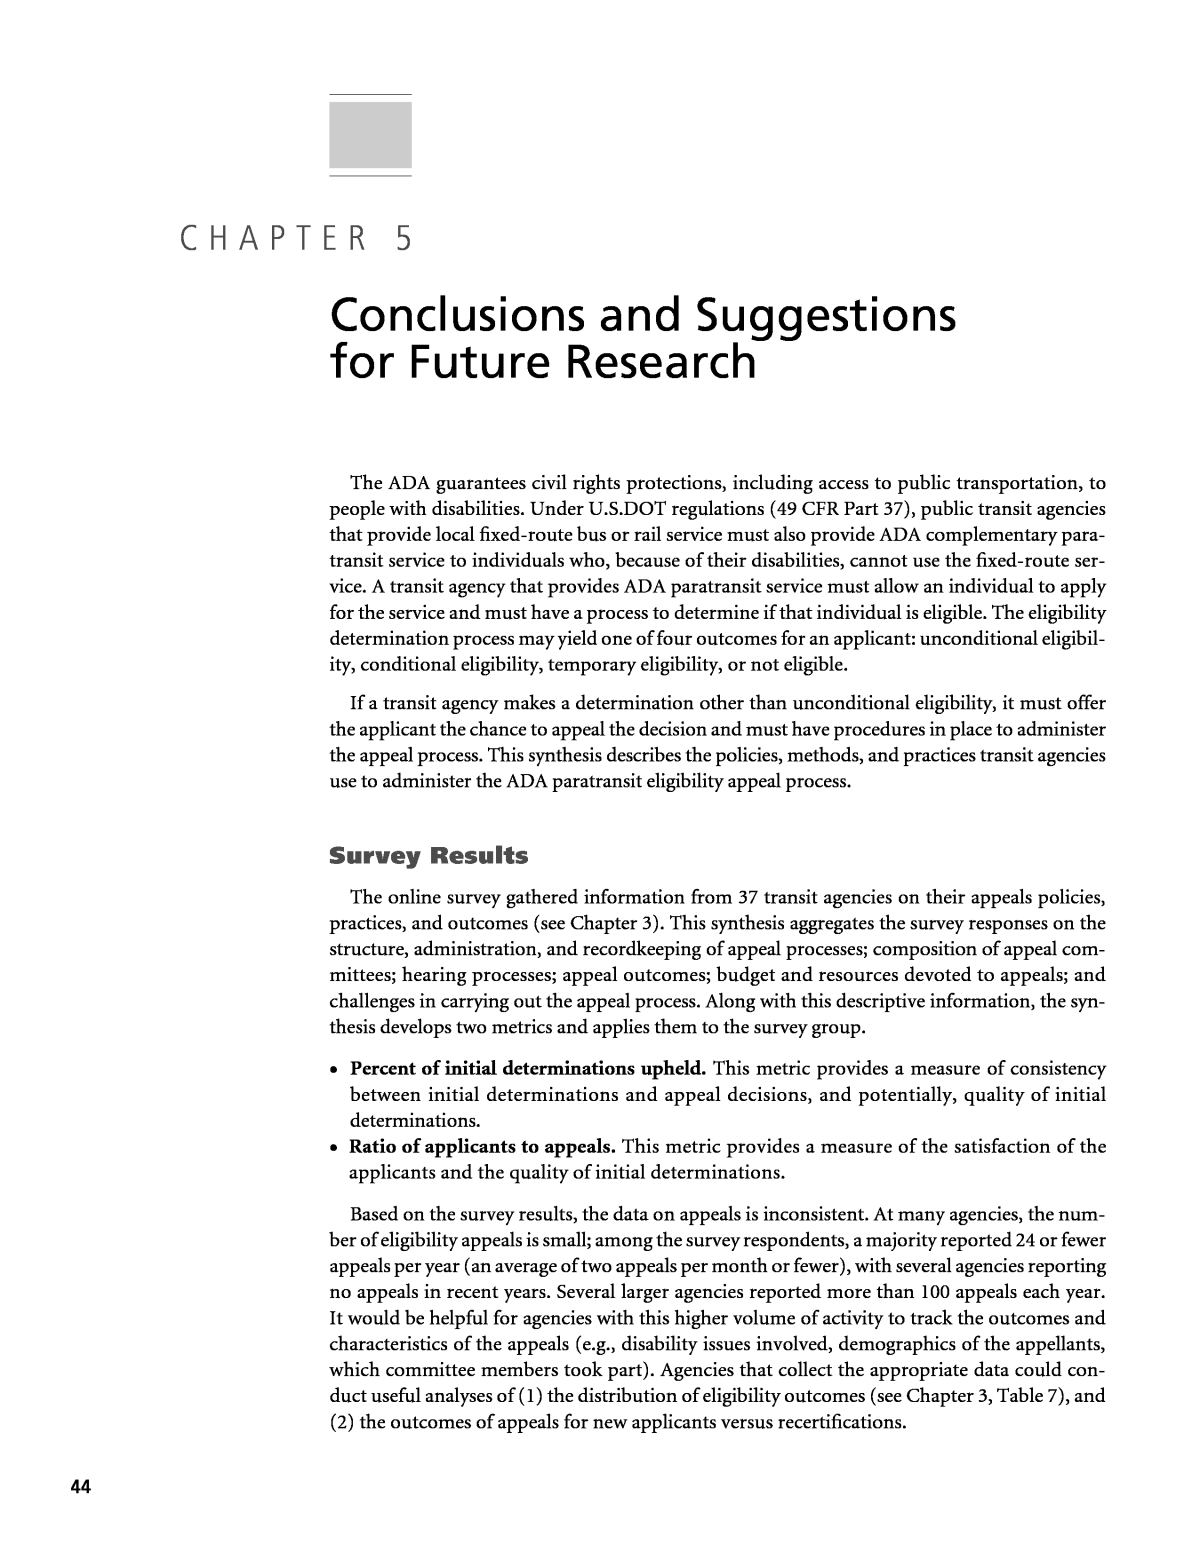 thesis suggestions for future research